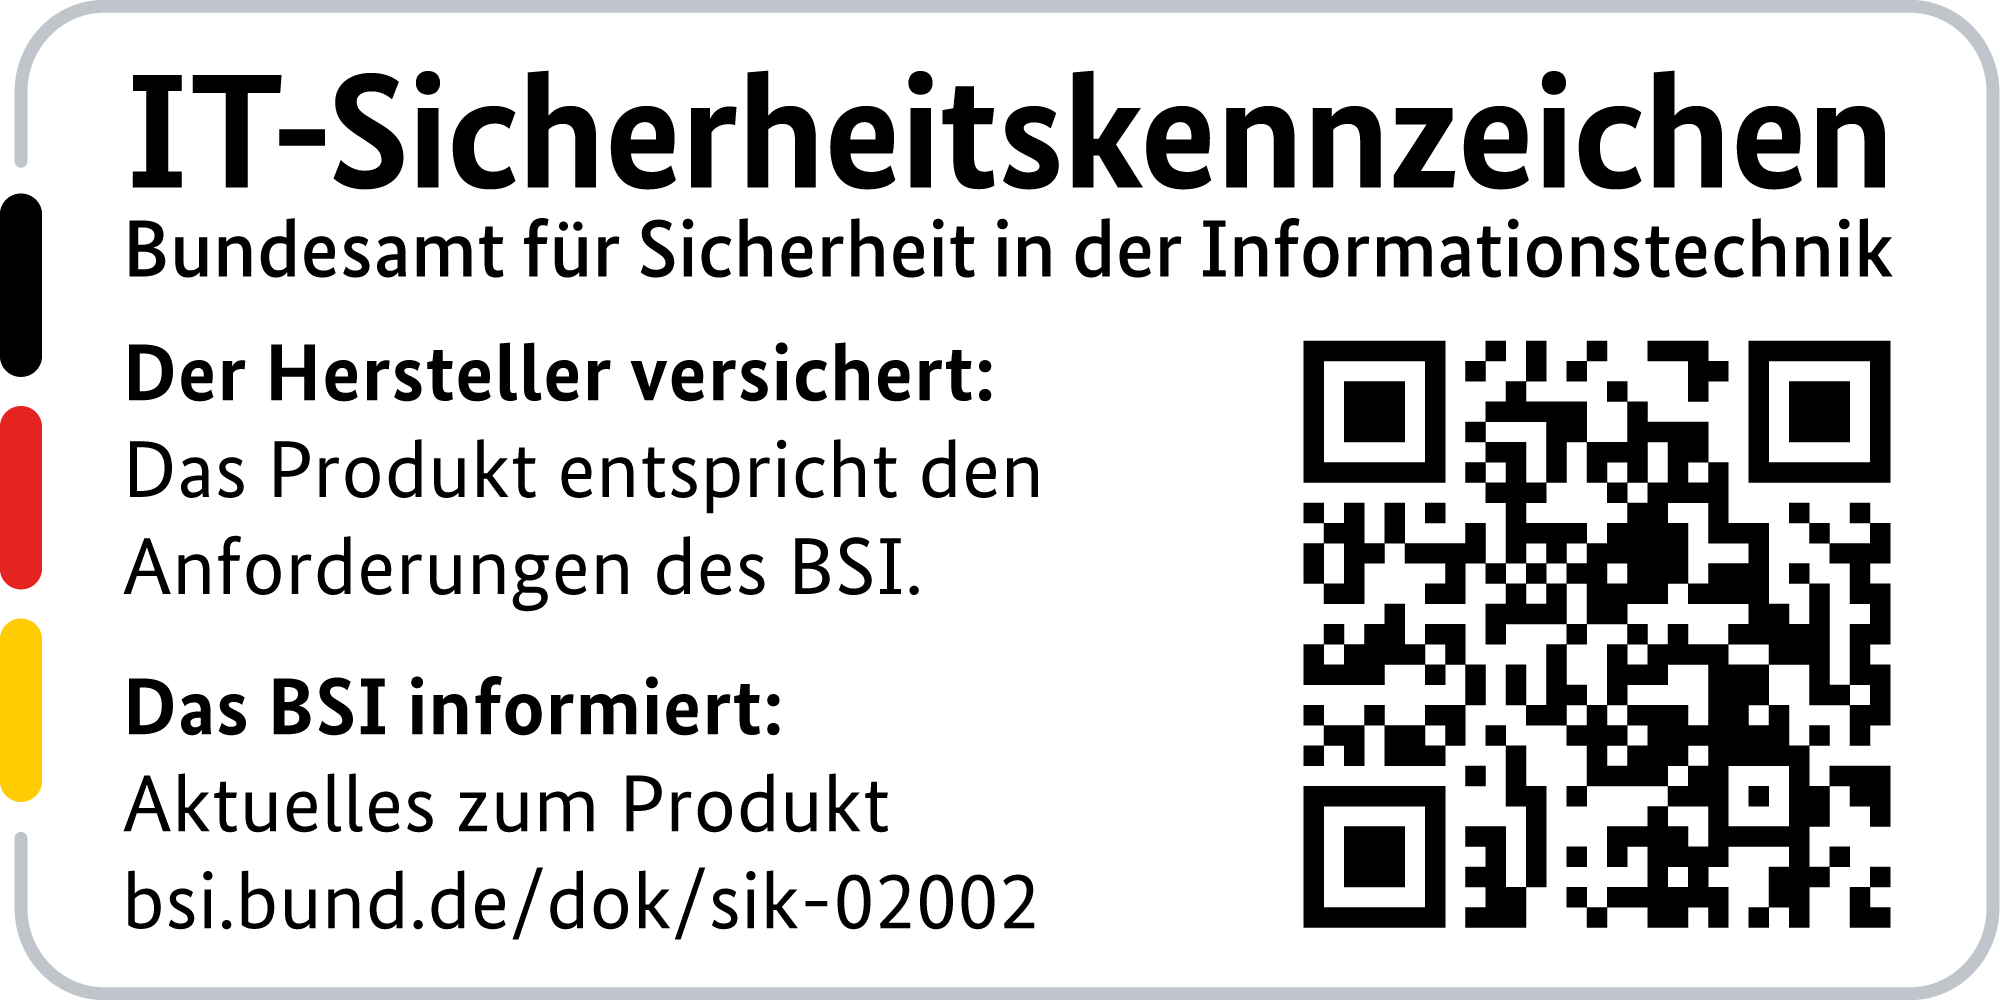 IT Security Label with QR code of the German BSI for LANCOM 883+ VoIP